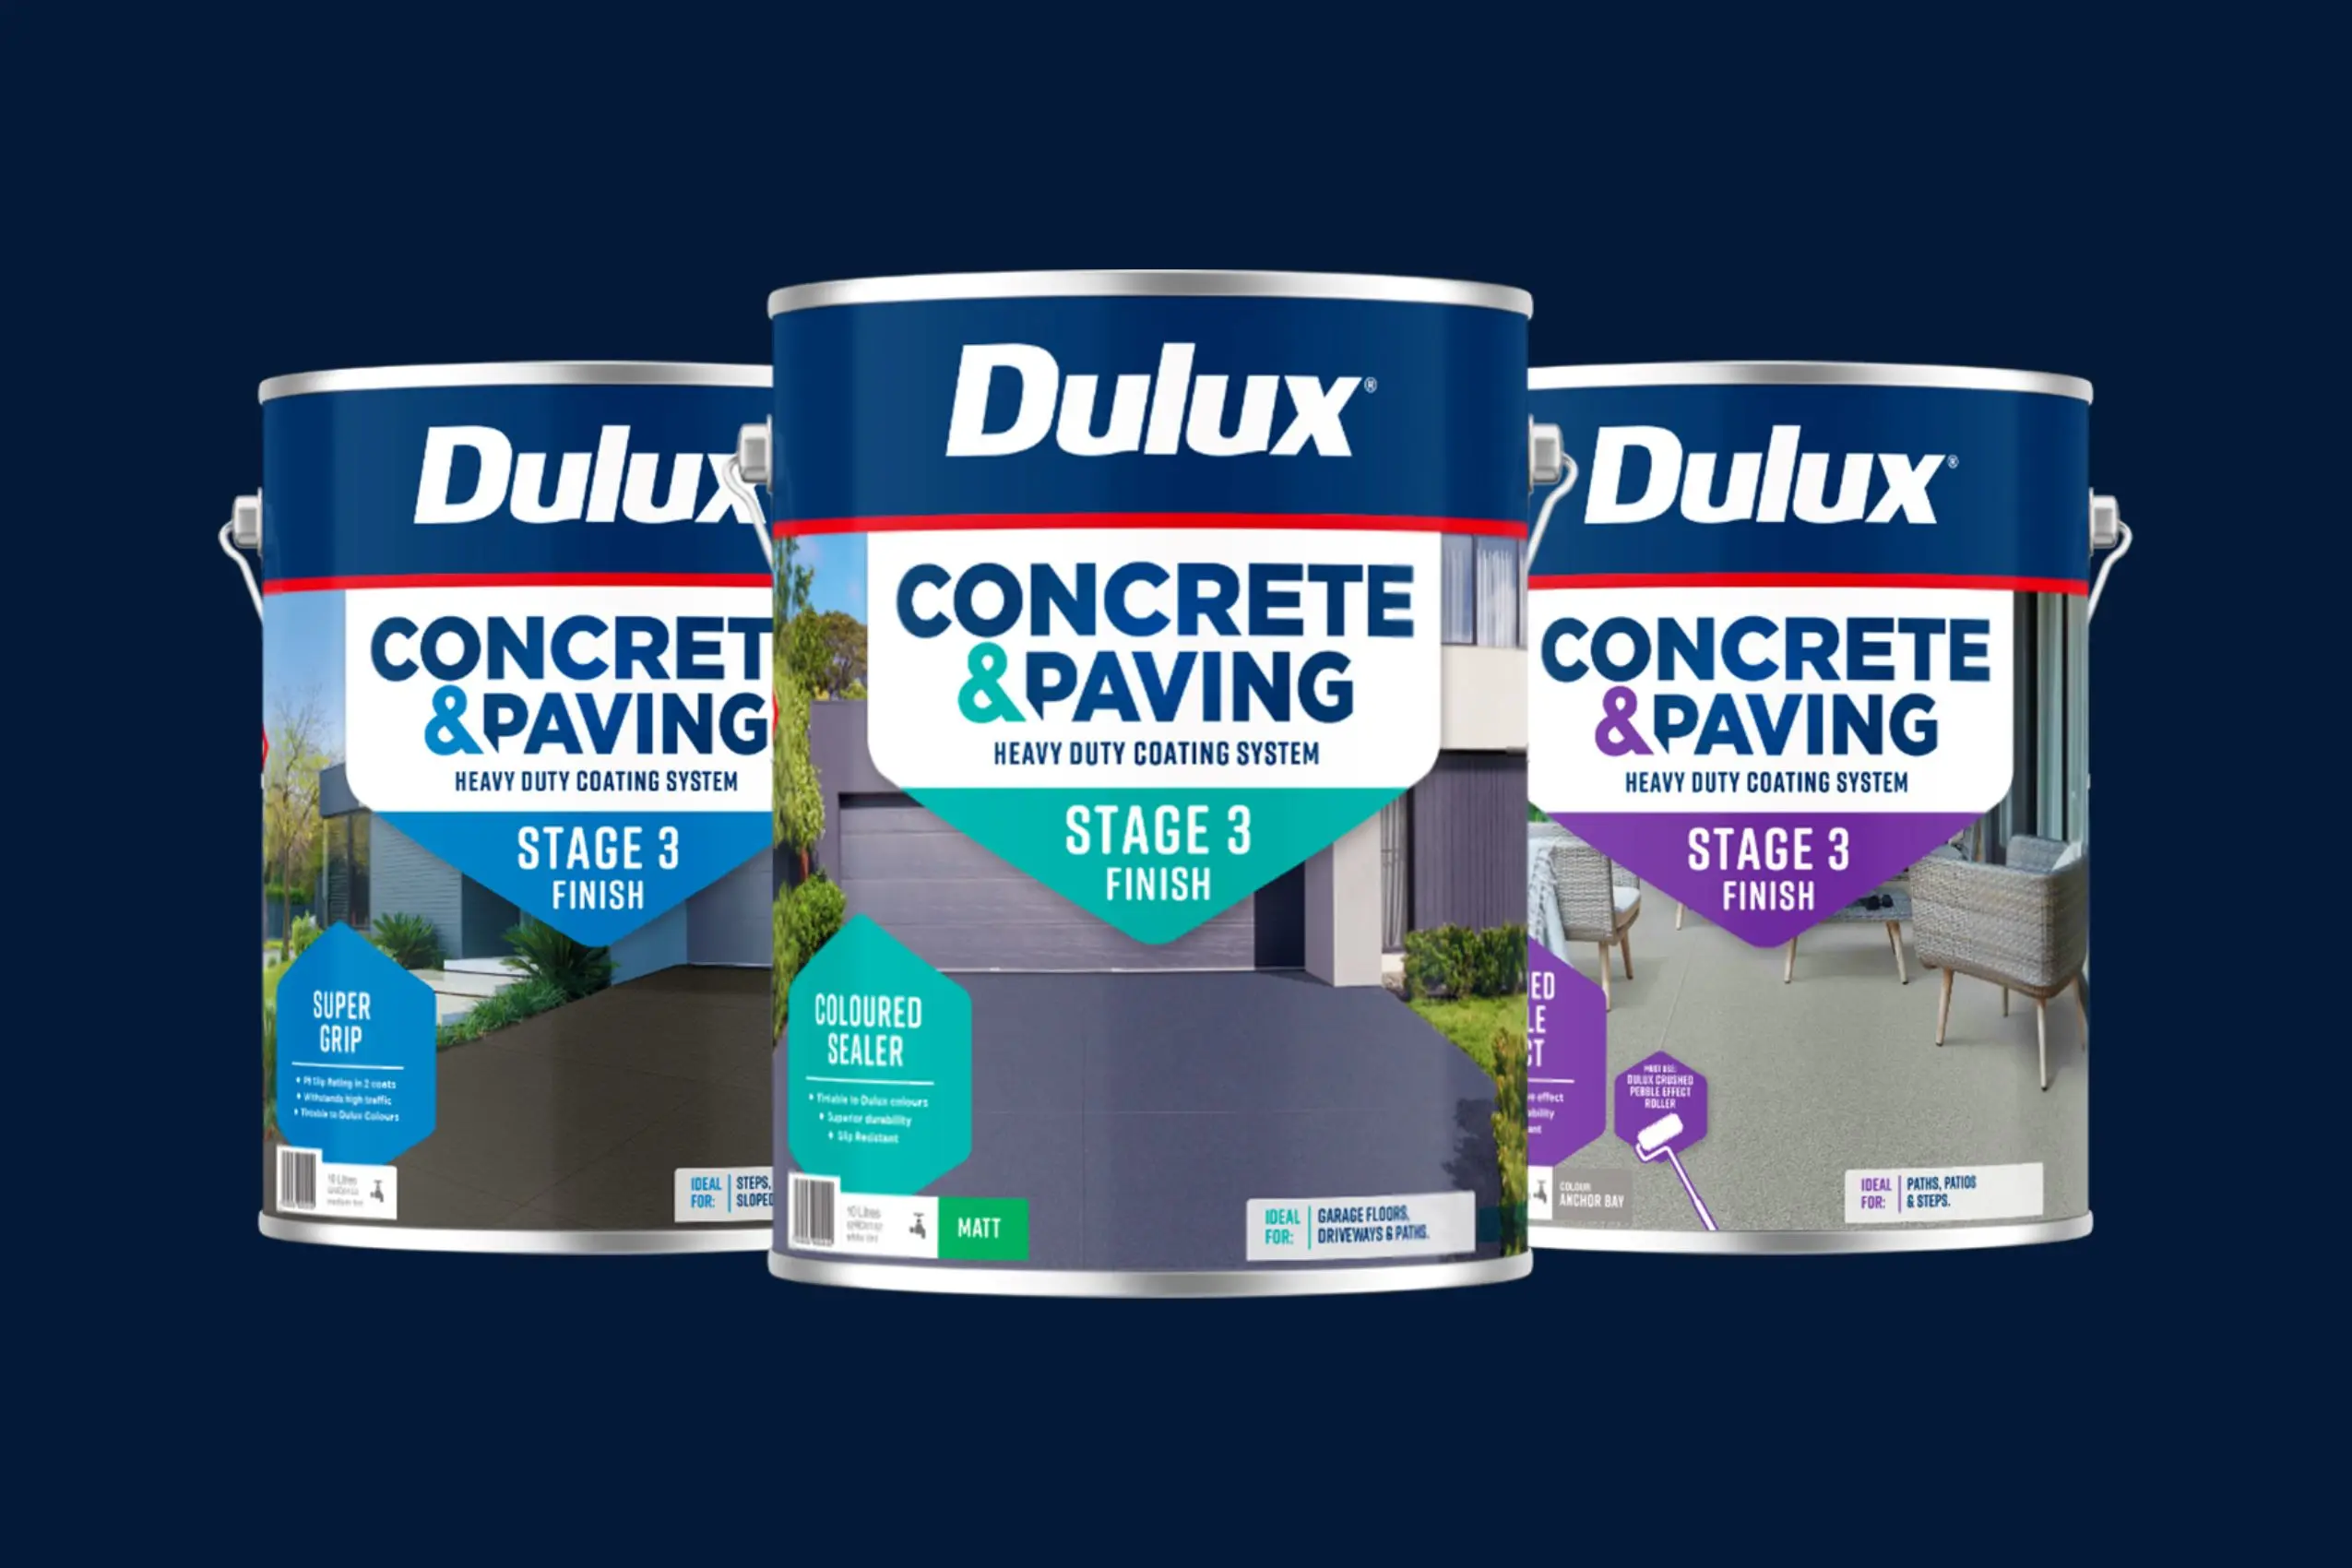 Three cans of Dulux Concrete & Paving